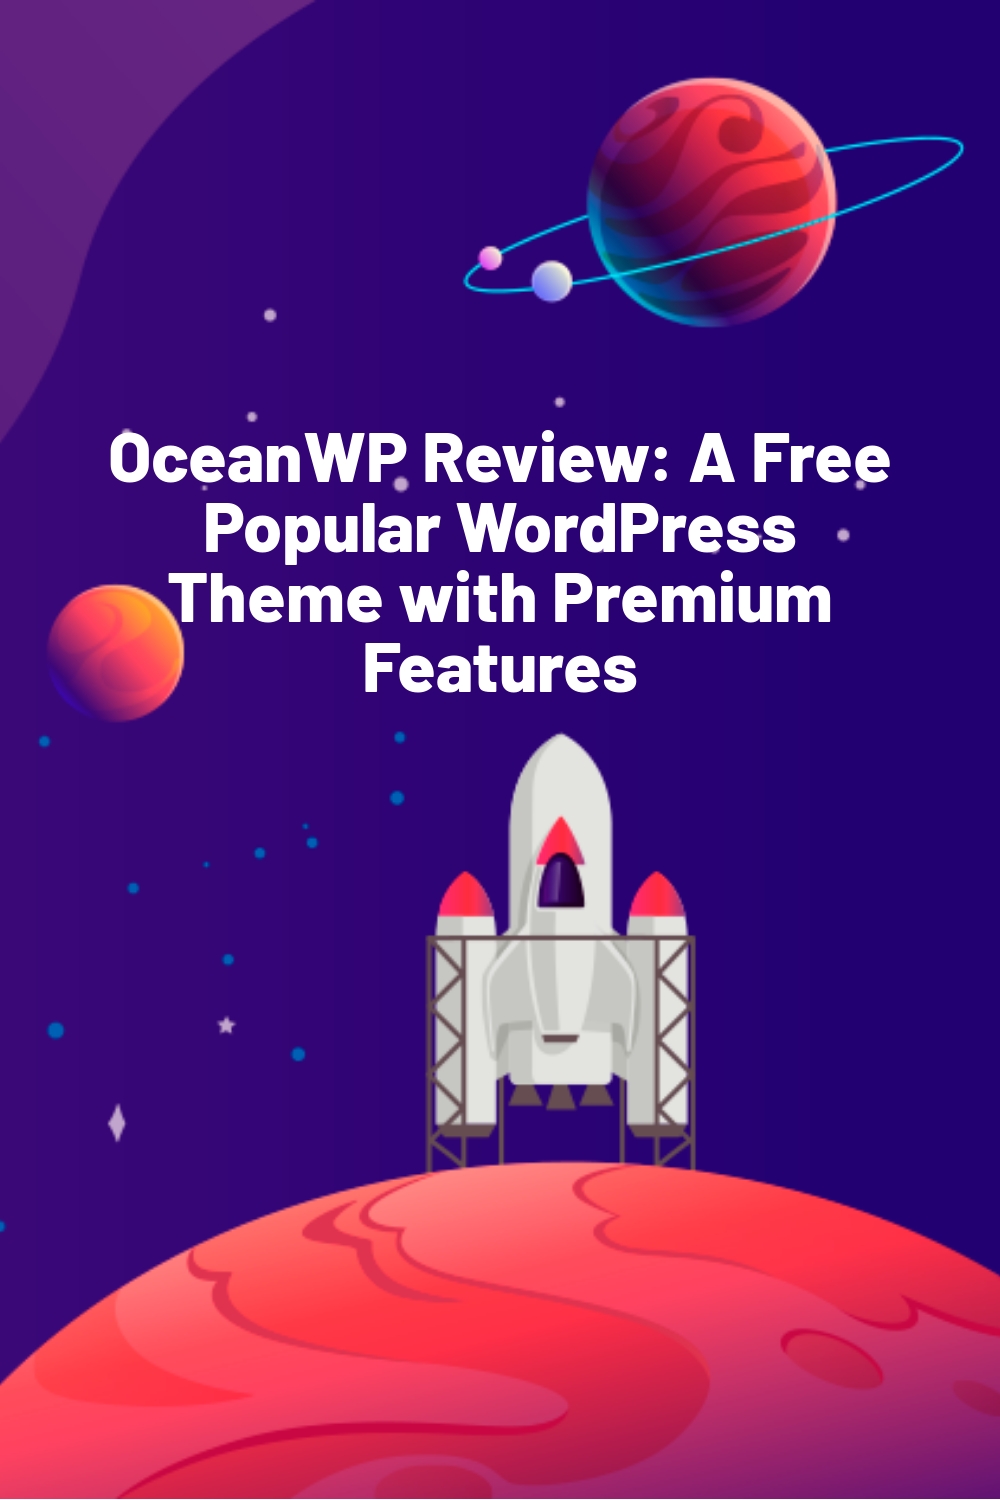 OceanWP Review: A Free Popular WordPress Theme with Premium Features